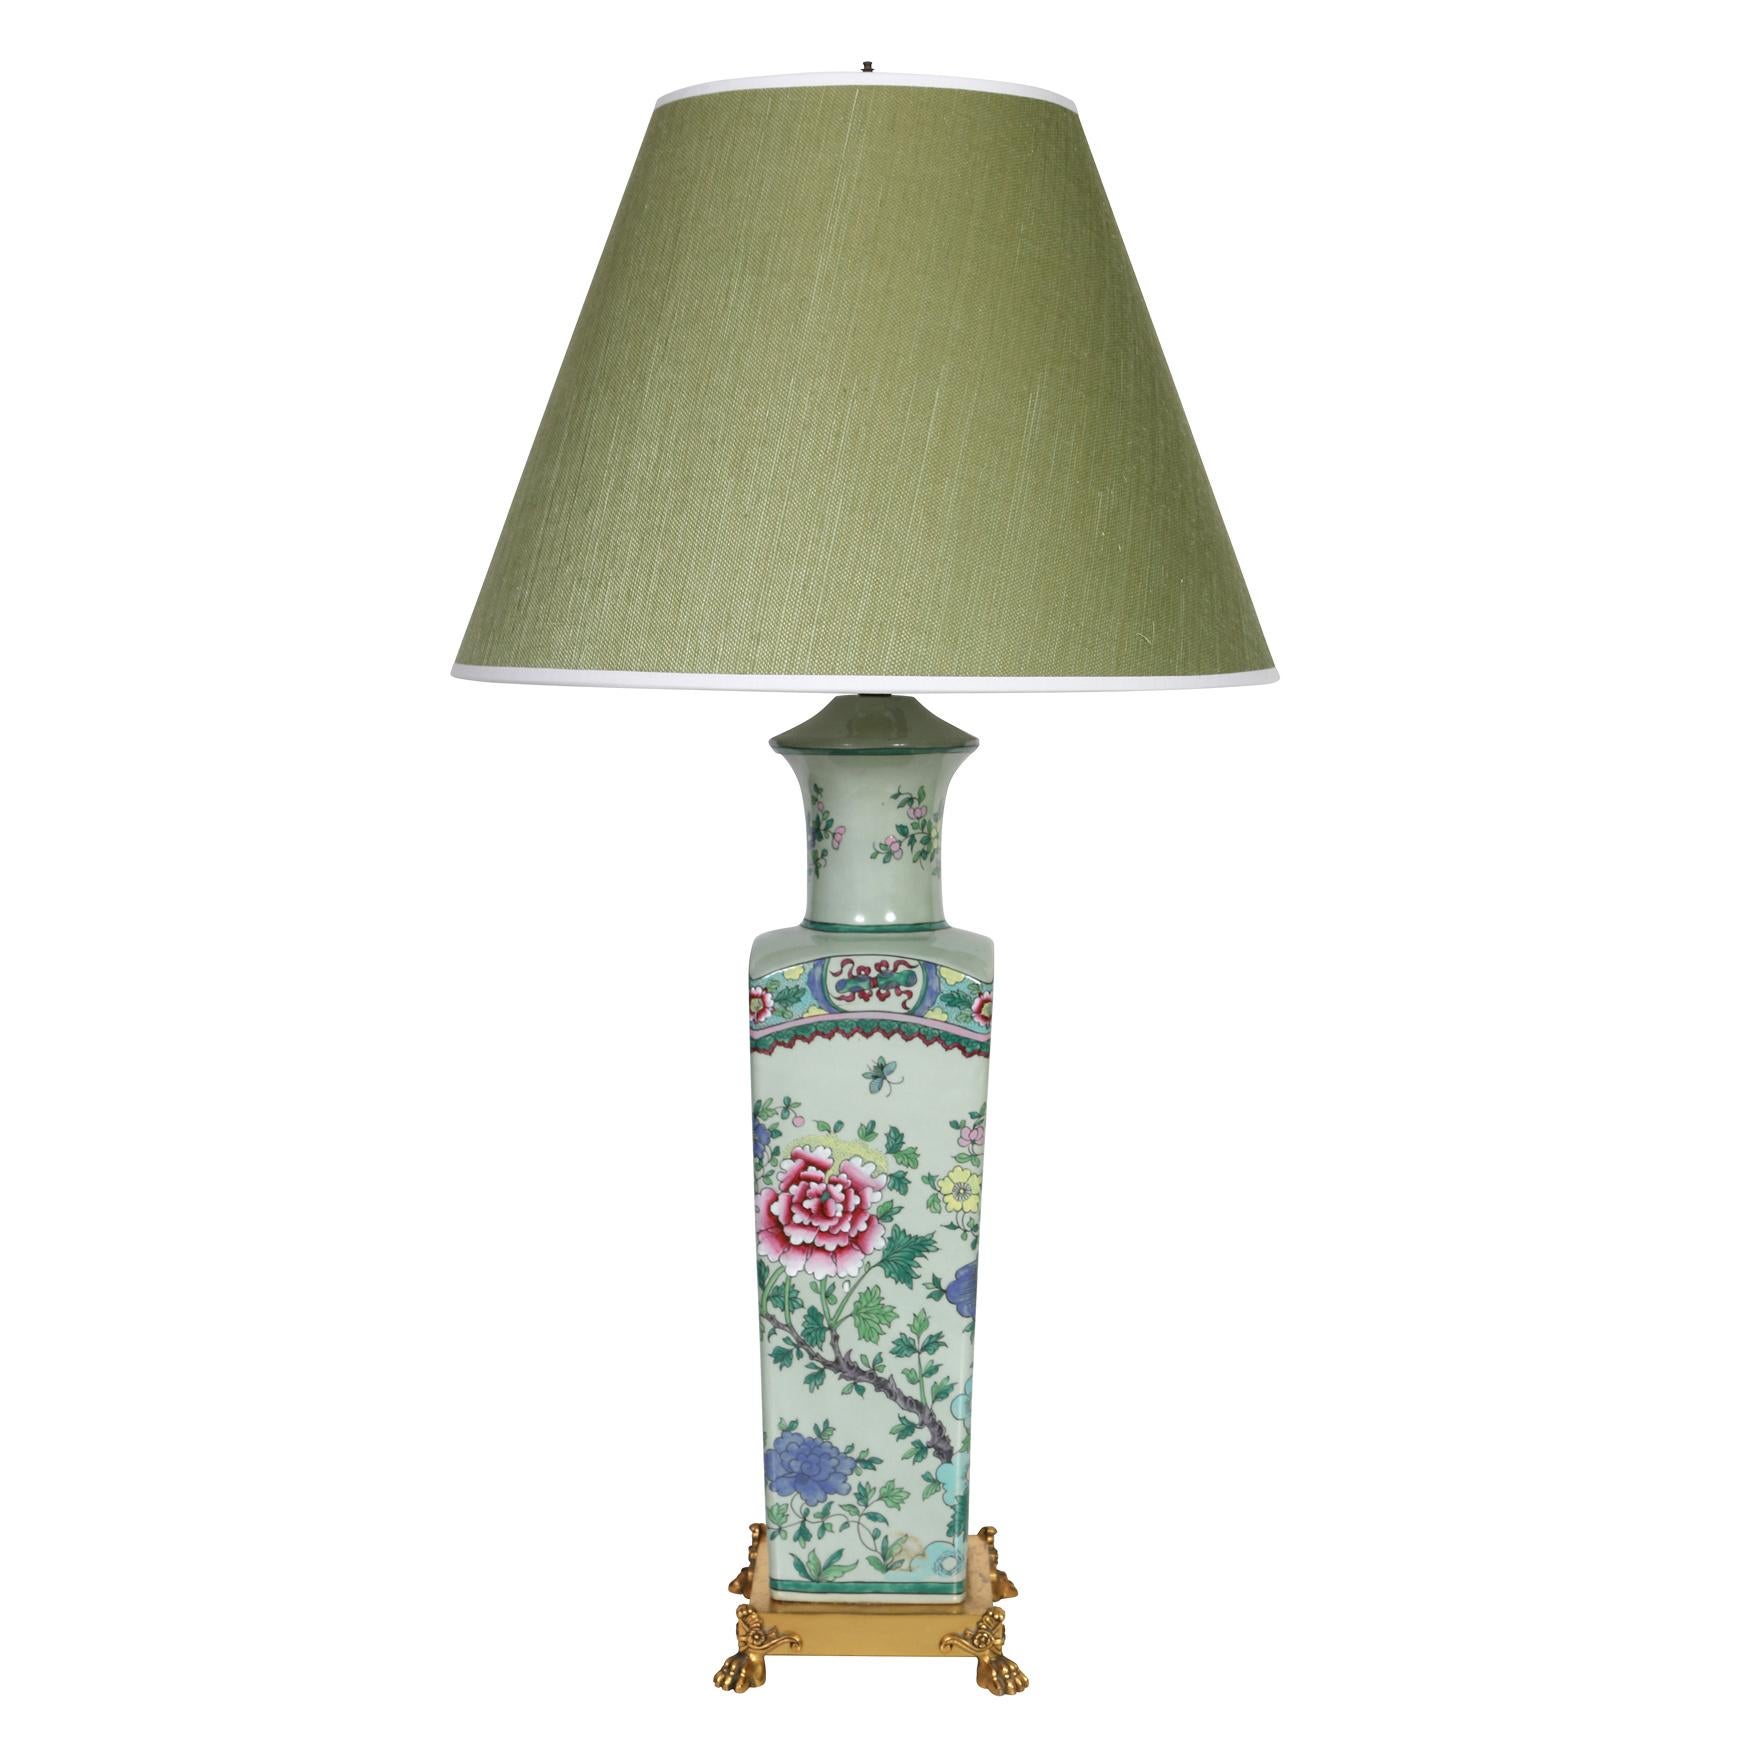 A pair of green chinoiserie porcelain lamps with brass feet. The tall vintage lamps are decorated in a beautiful Asian style with detailed and vivid pink-red and blue flowers, vines and birds with large colorful tail feathers. The lamps sit on a